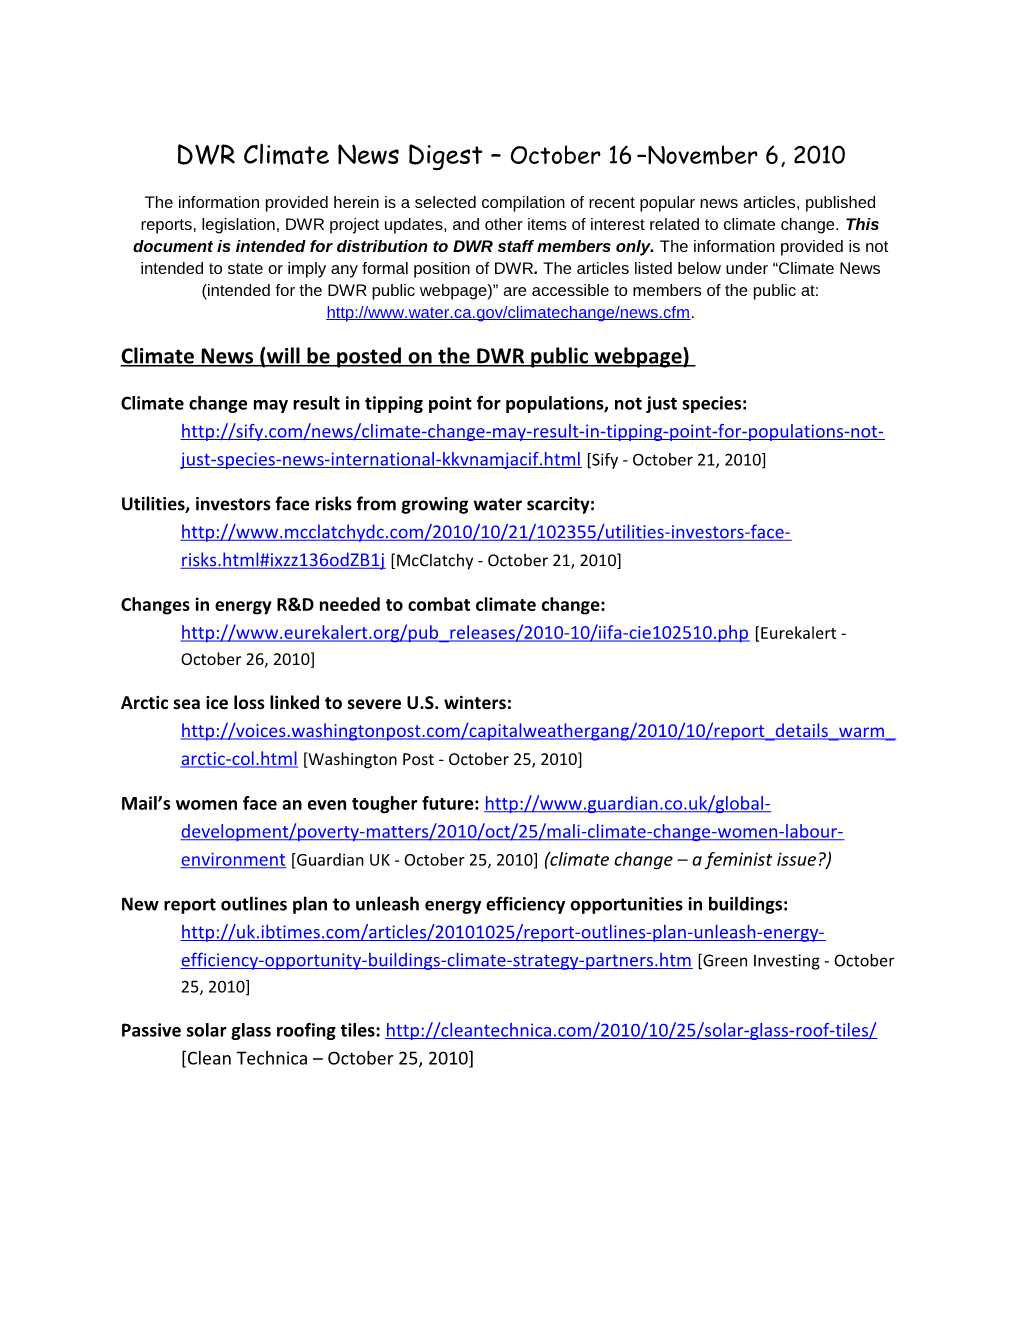 Climate News (Will Be Postedon the Dwrpublic Webpage)